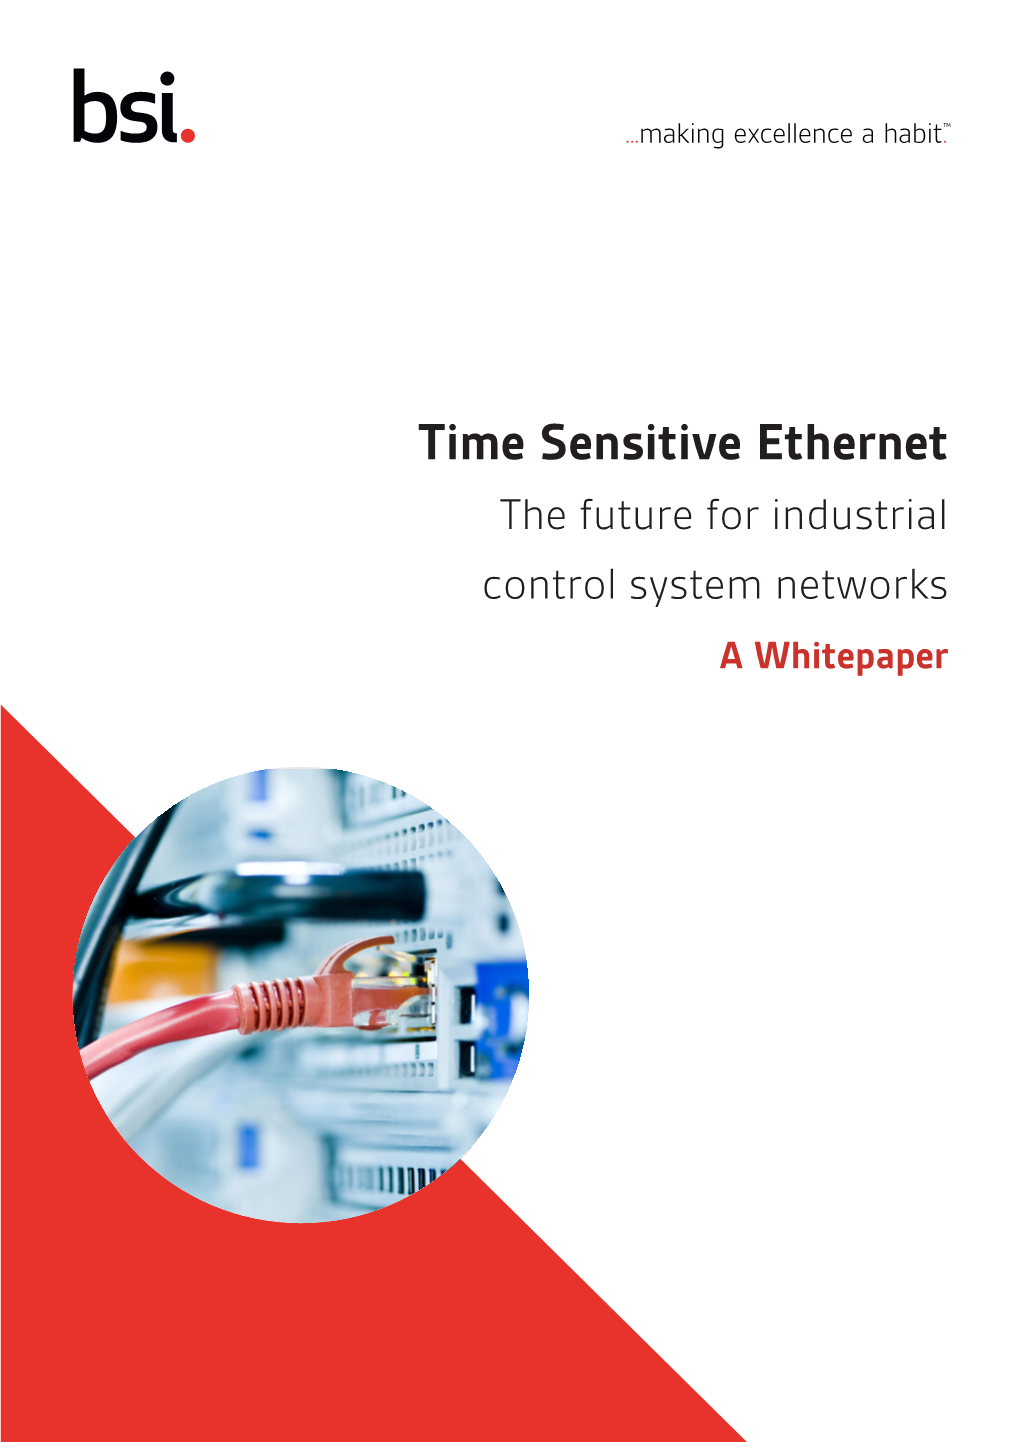 Time Sensitive Ethernet the Future for Industrial Control System Networks a Whitepaper